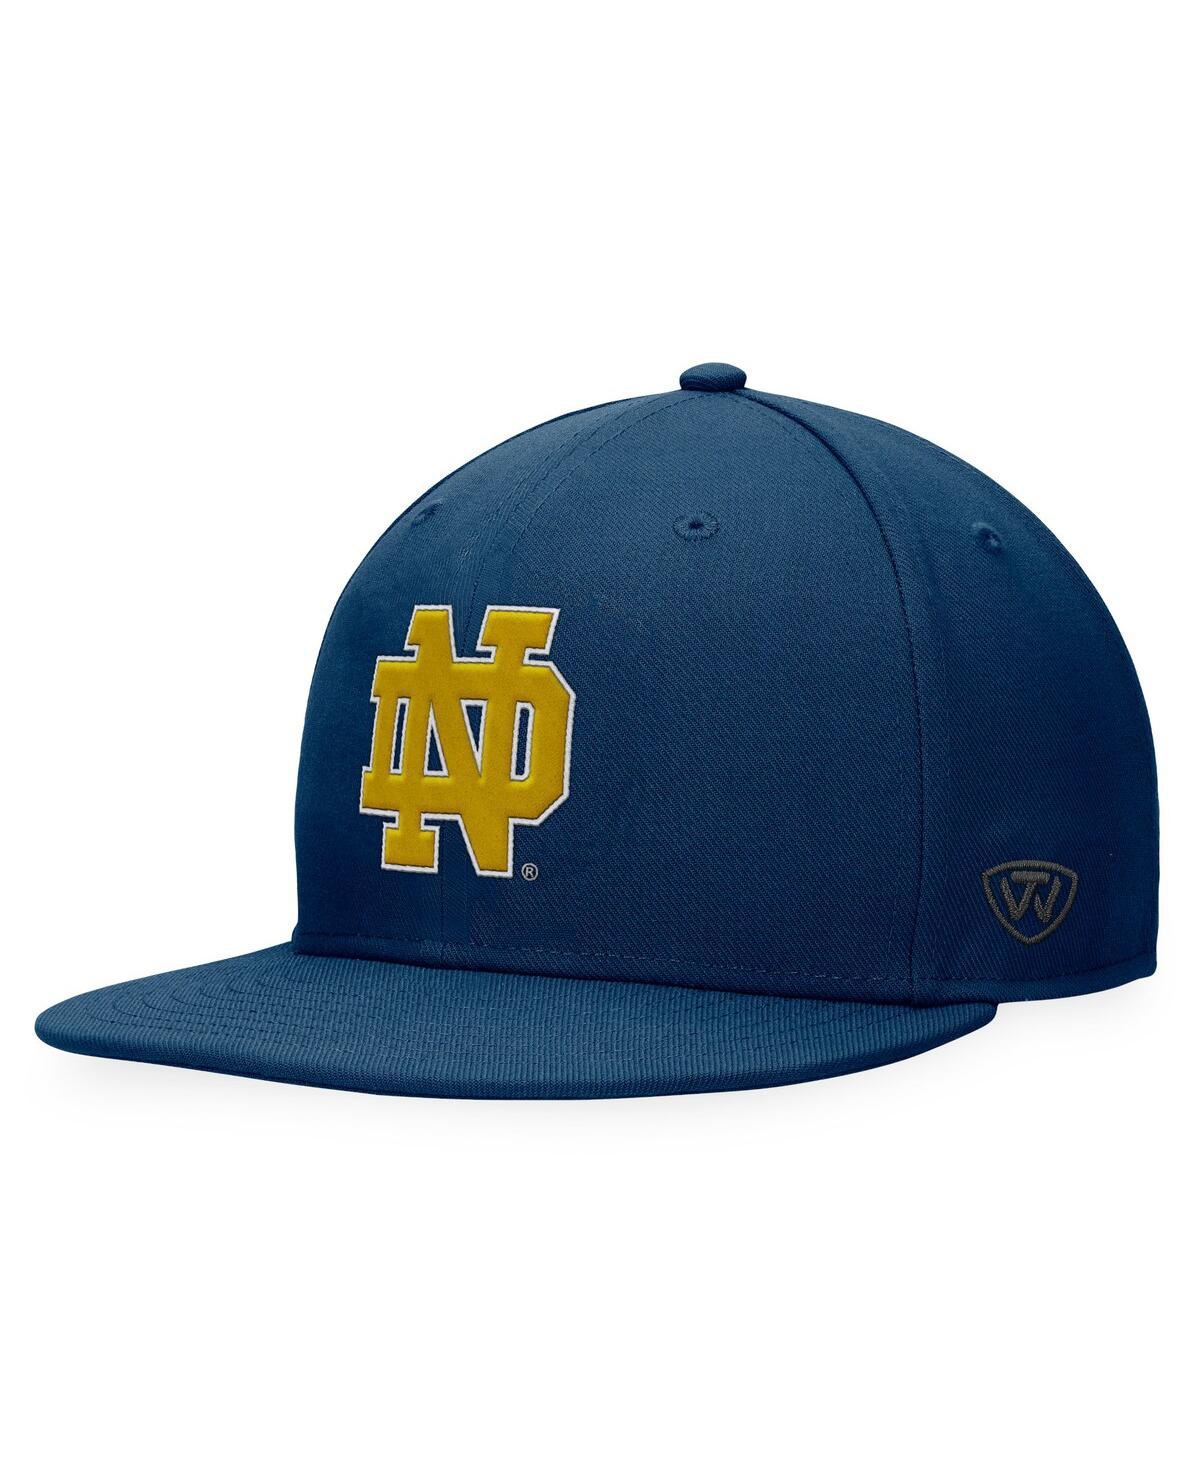 Men's Navy Notre Dame Fighting Irish Fitted Hat - Trd Nvy